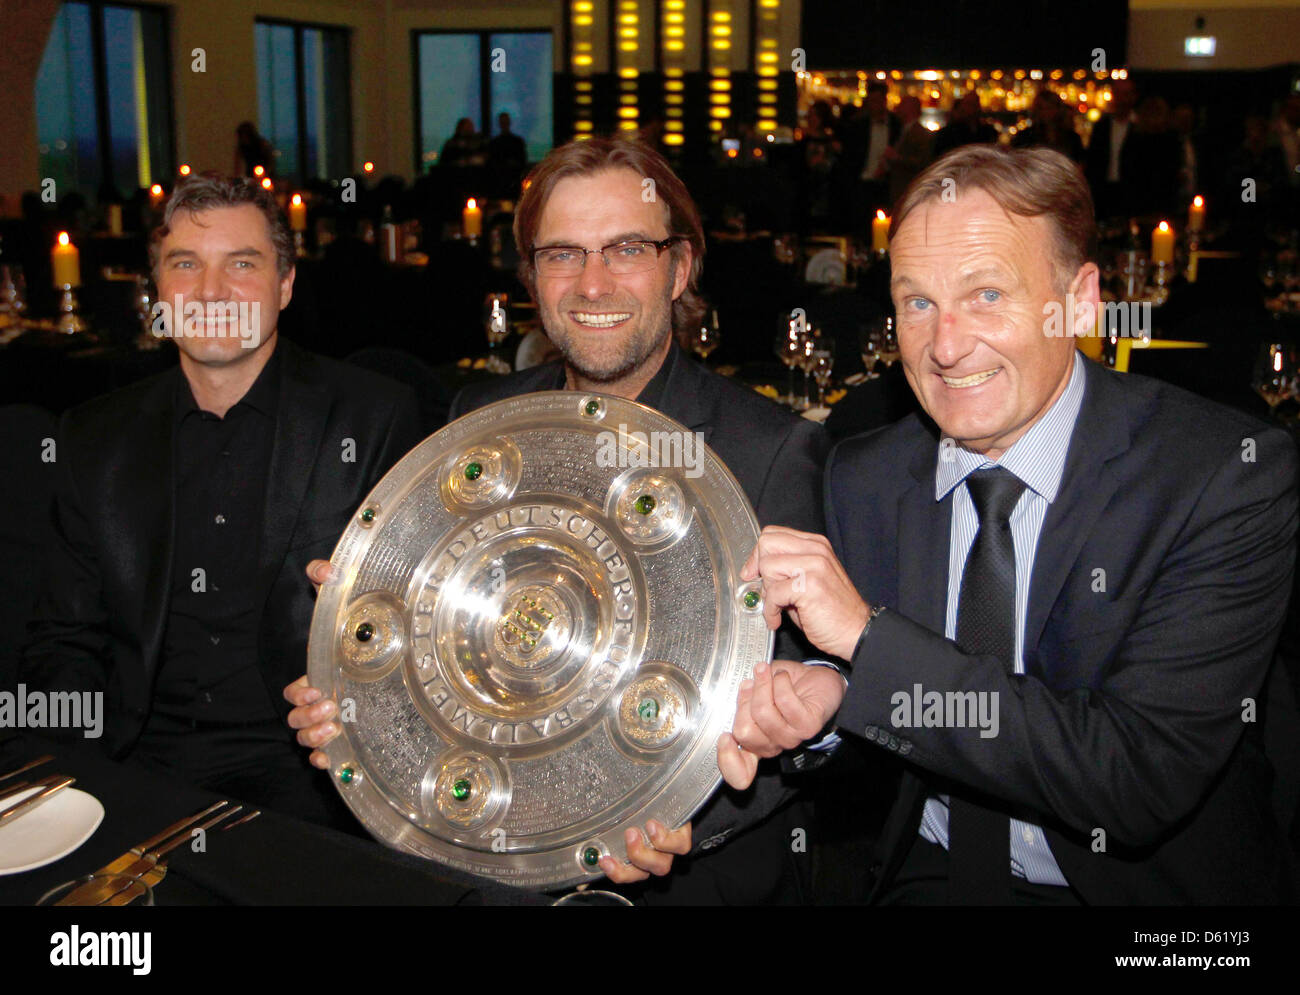 Borussia Dortmund's manager Michael Zorc (L-R), head coach Juergen Klopp and club CEO Hans-Joachim Watzke pose with the German soccer championship trophy during a dinner after winning the German Bundesliga soccer championship in Dortmund, May 5, 2012. Photo: Ina Fassbender Reuters Pool;dpa Stock Photo